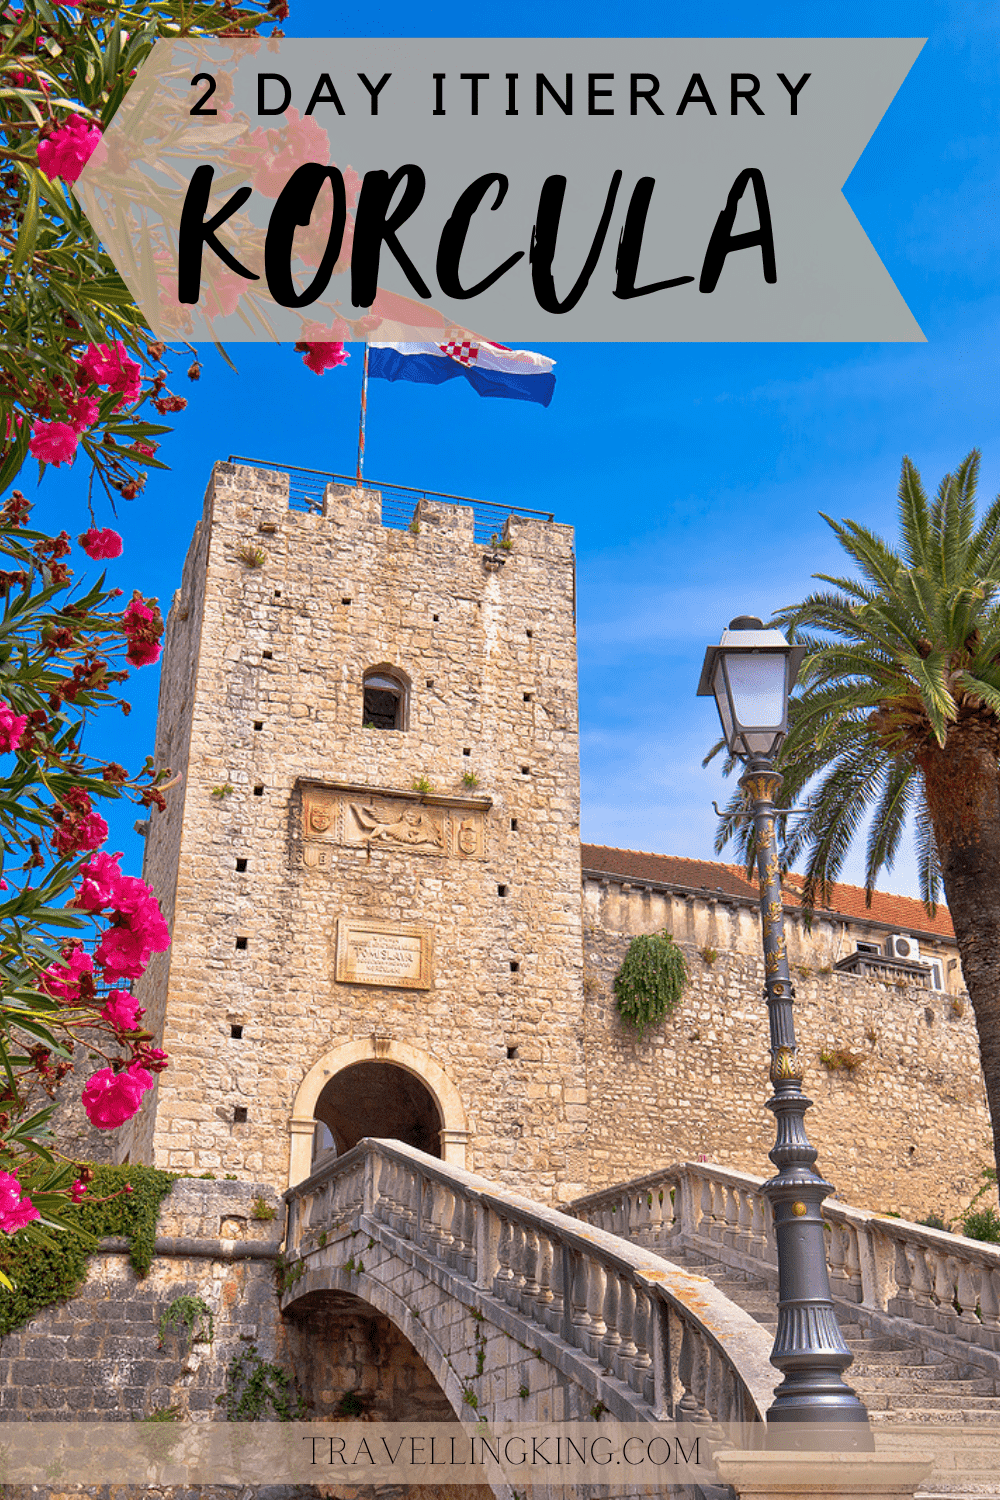 48 hours in Korcula - 2 Day Itinerary